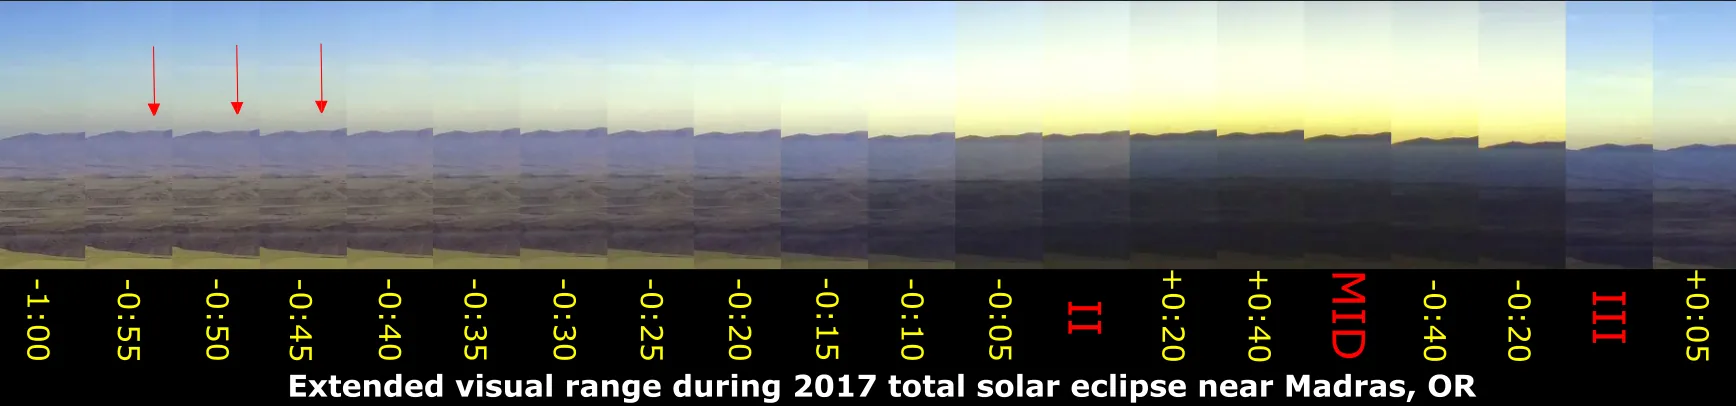 Total solar eclipse visual range changes towards Mount Adams drone perspective